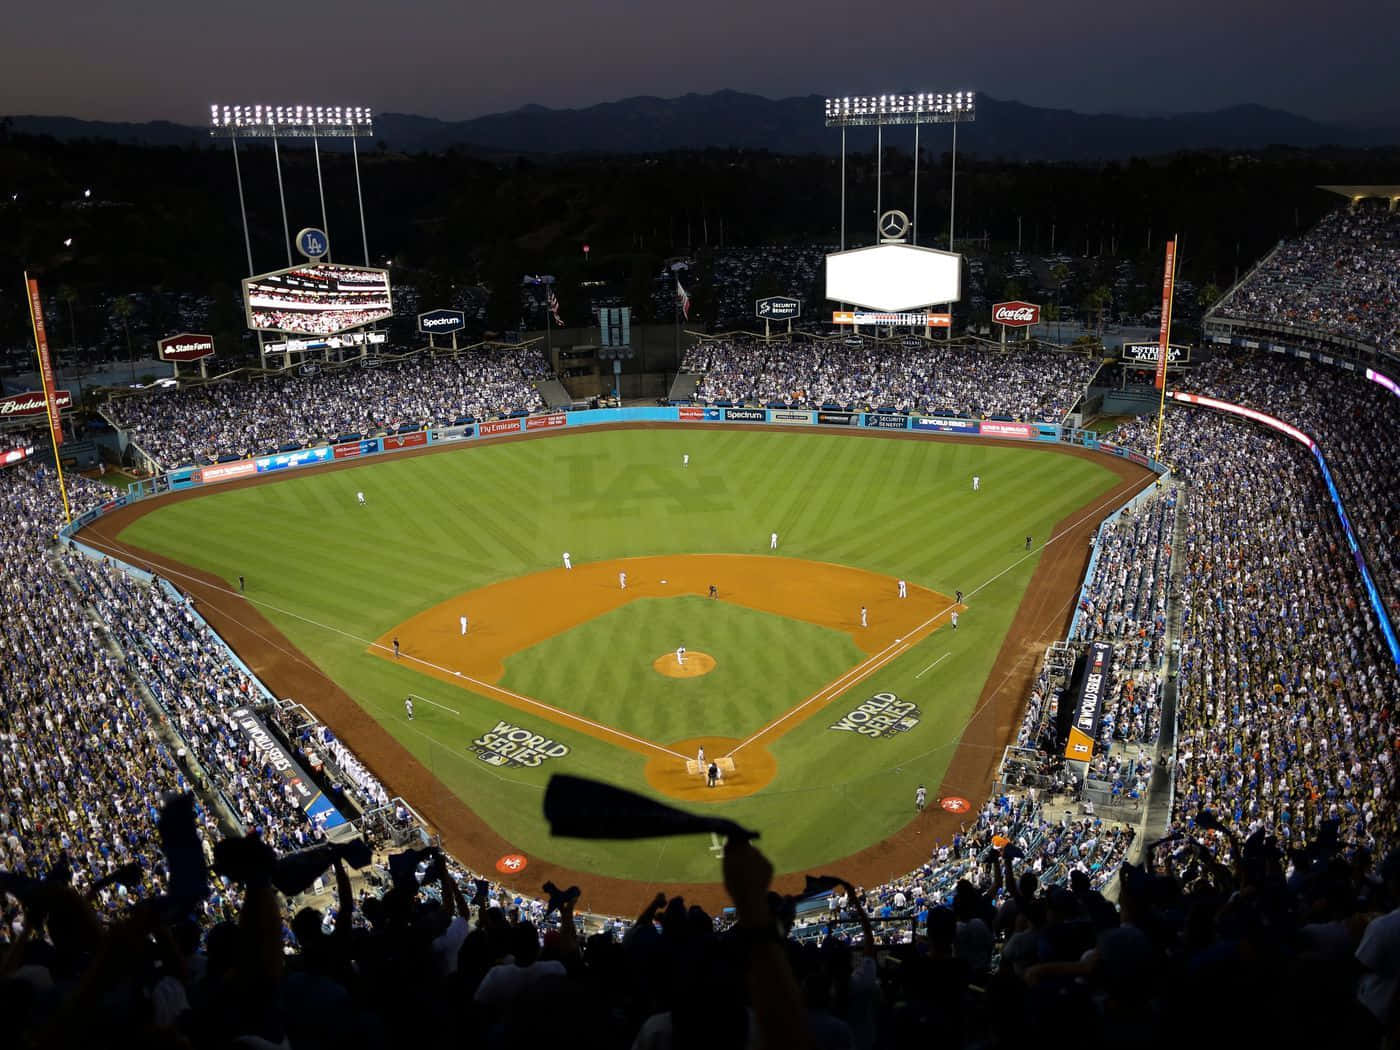 Experience the vibe of Dodger Stadium, home of the Los Angeles Dodgers. Wallpaper